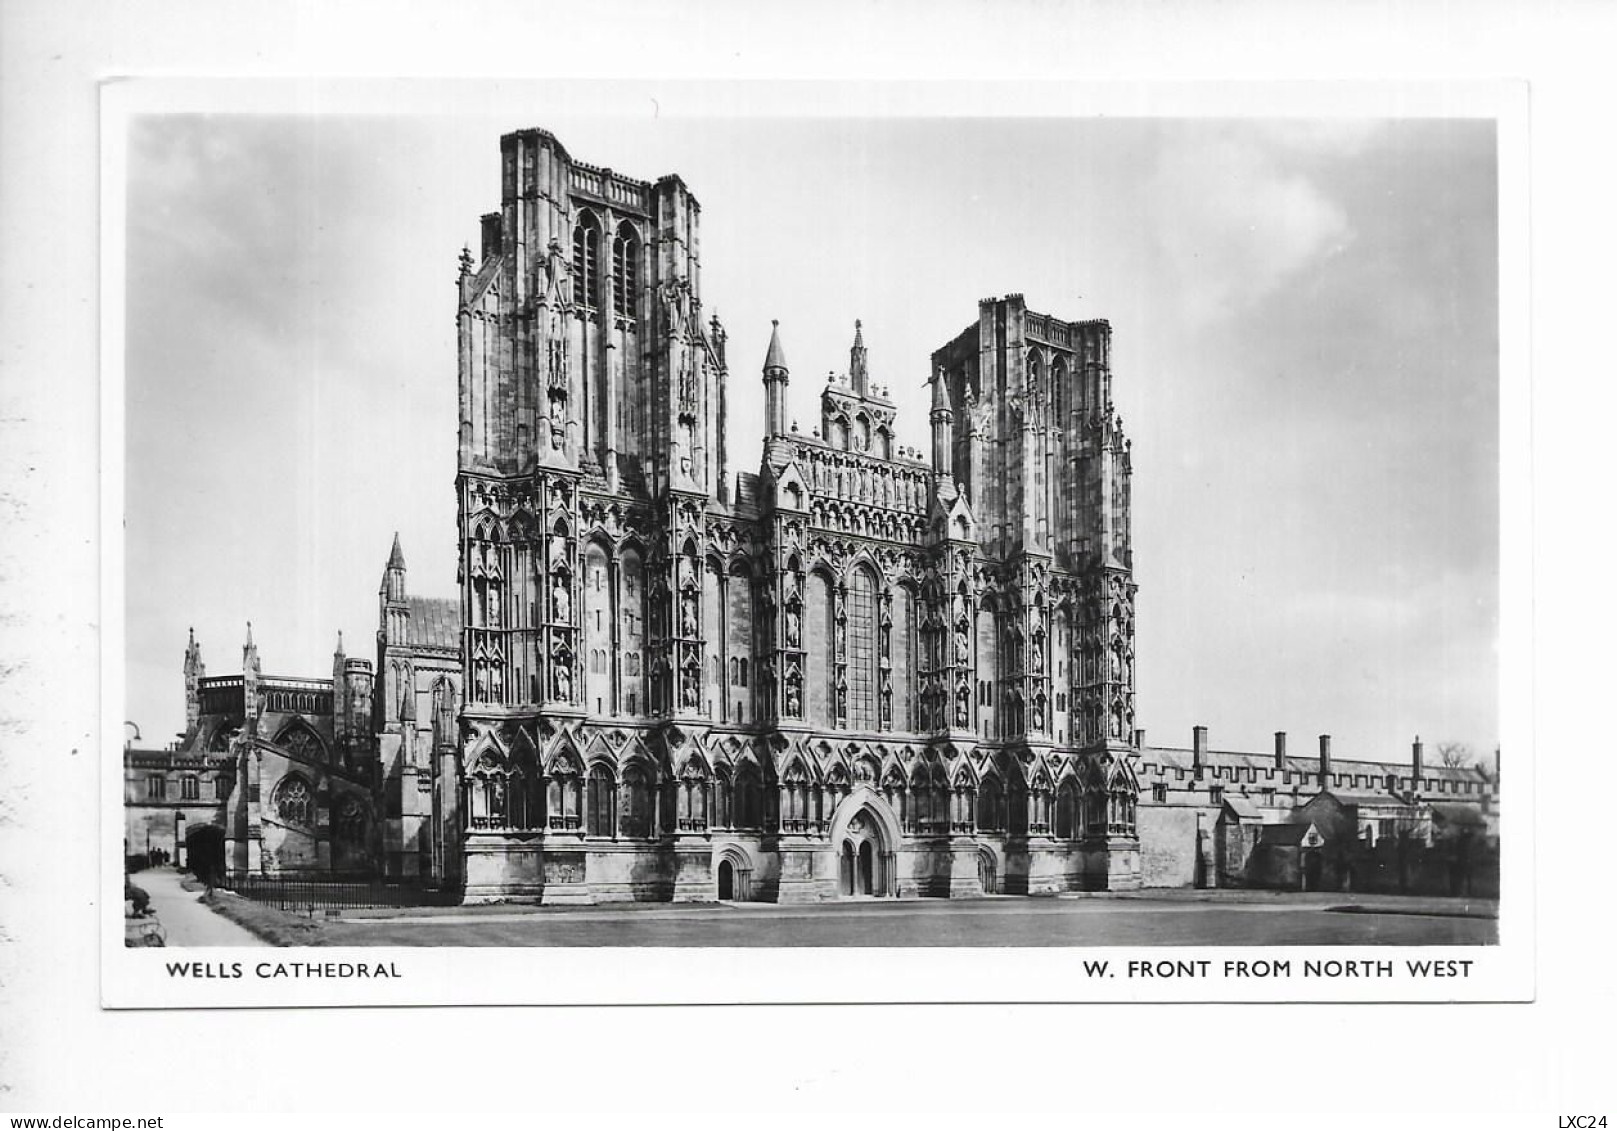 WELLS CATHEDRAL. - Wells